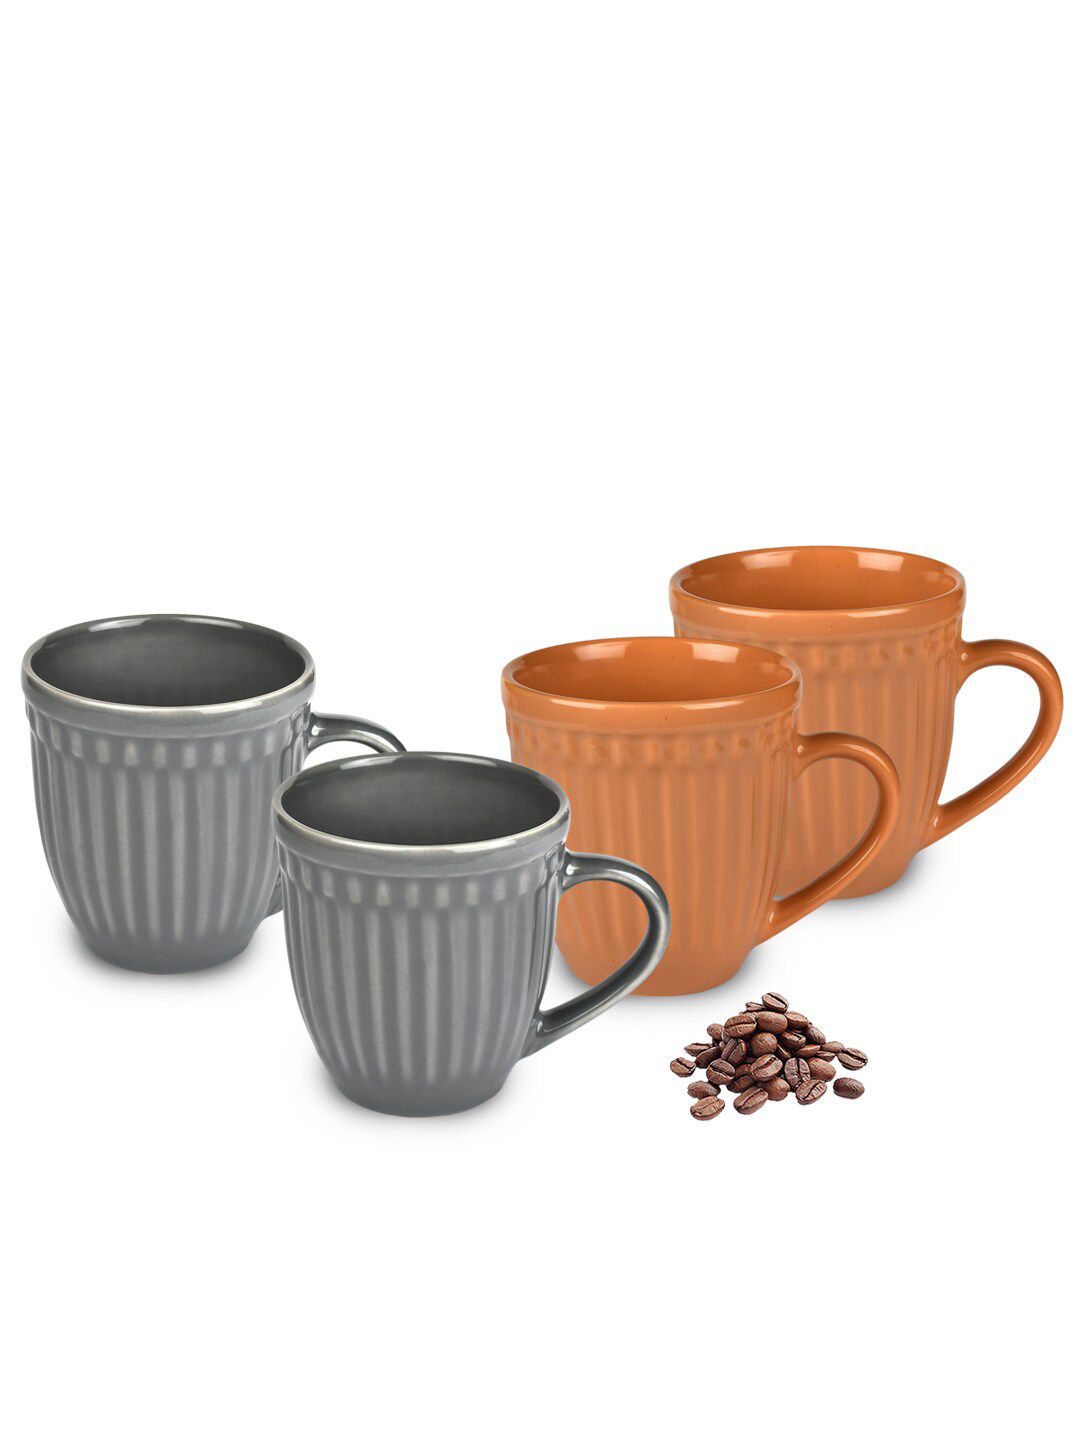 URBAN CHEF Set Of 4 Grey & Brown Textured Handcrafted Ceramic Glossy Mugs Price in India